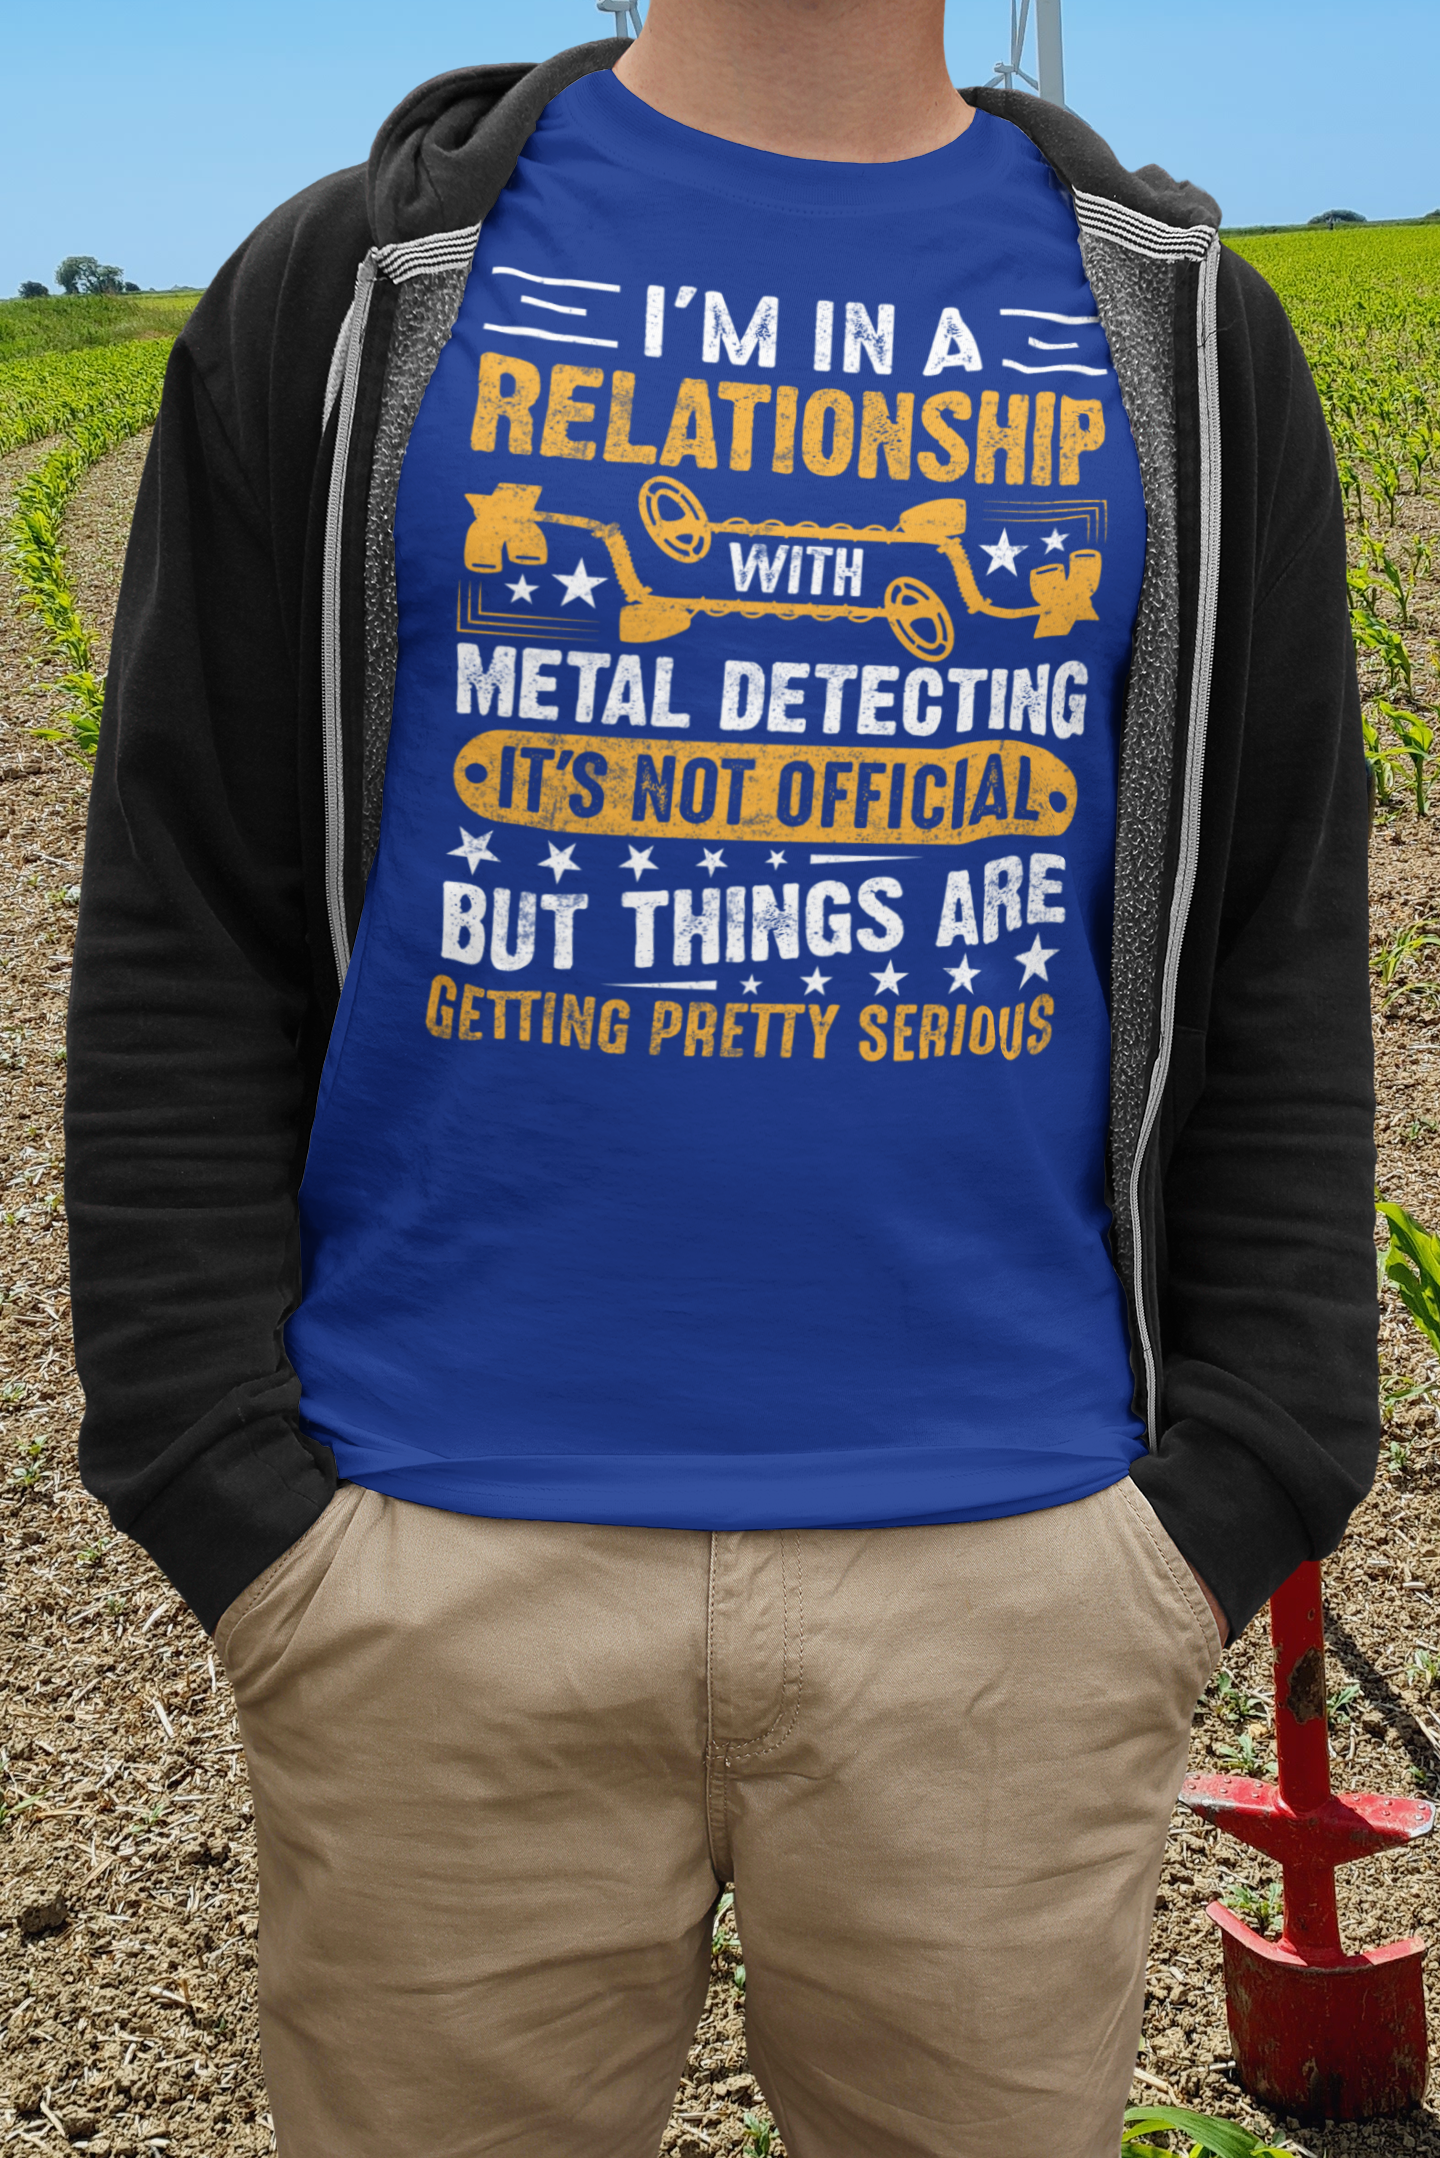 Im in a relationship with metal detecting